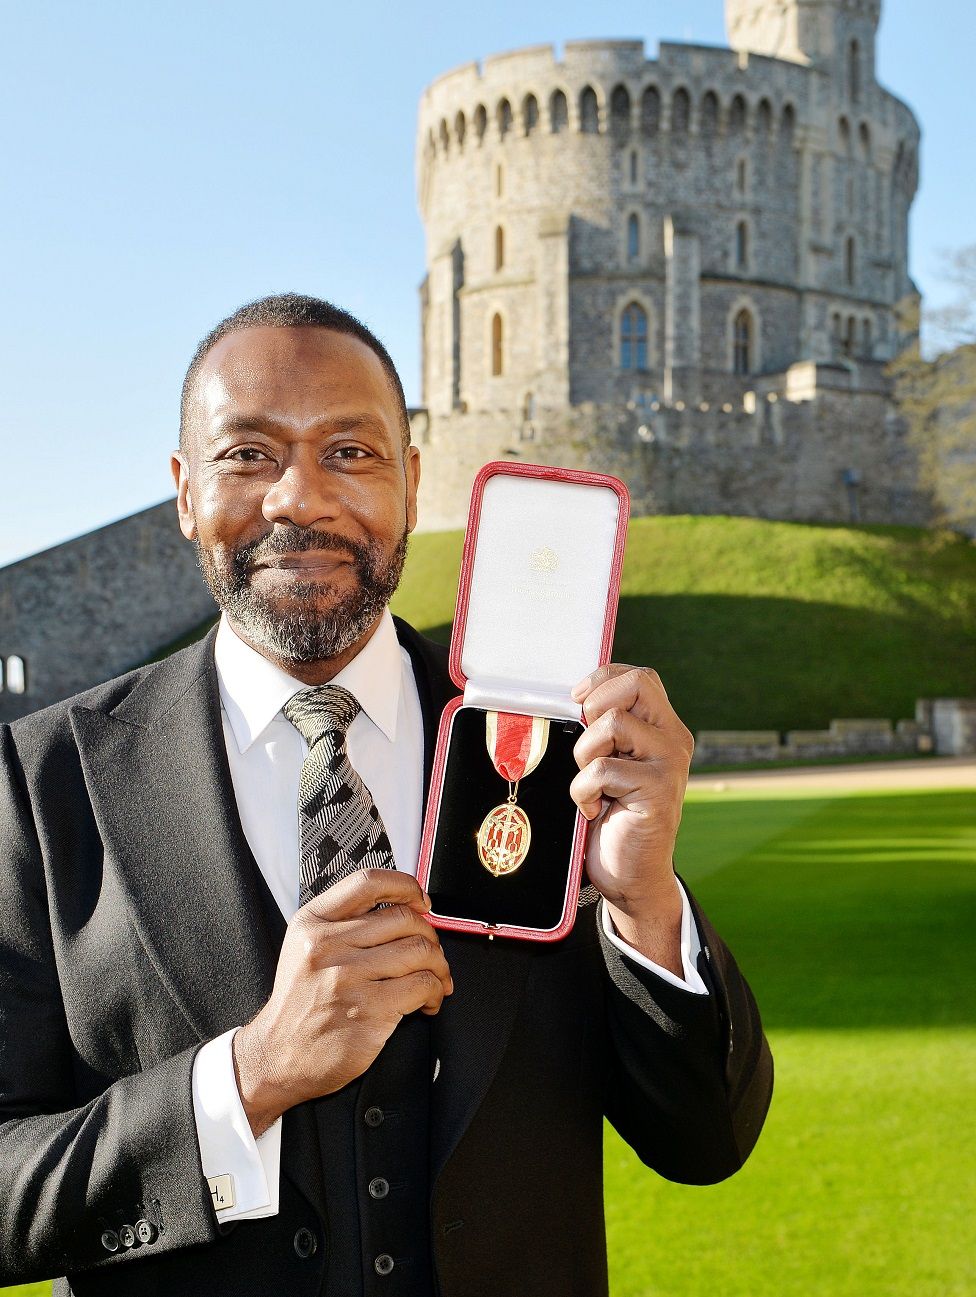 Sir Lenny Henry after receiving a Knighthood from Queen Elizabeth II during an Investiture ceremony at Windsor Castle on December 4, 2015 in Windsor, England